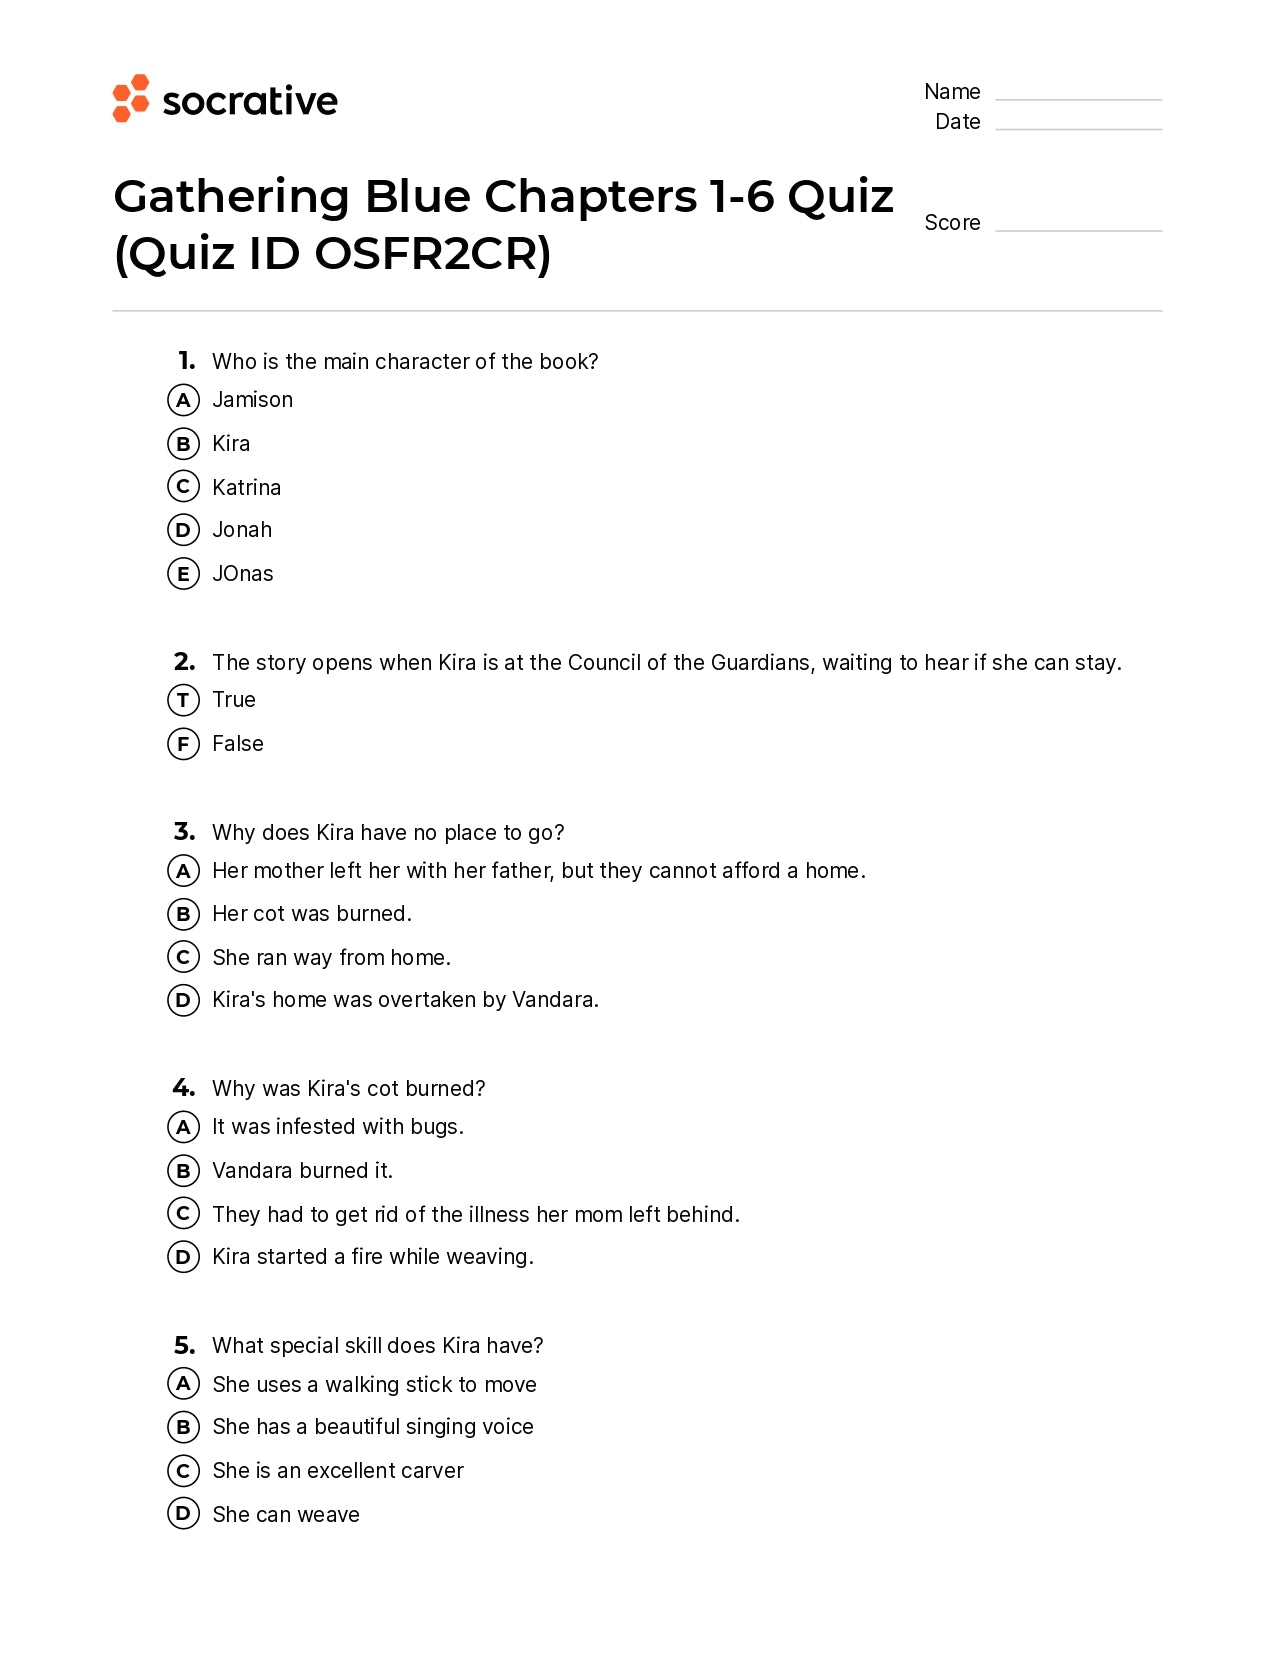 Gathering Blue Chapters 1-6 Quiz